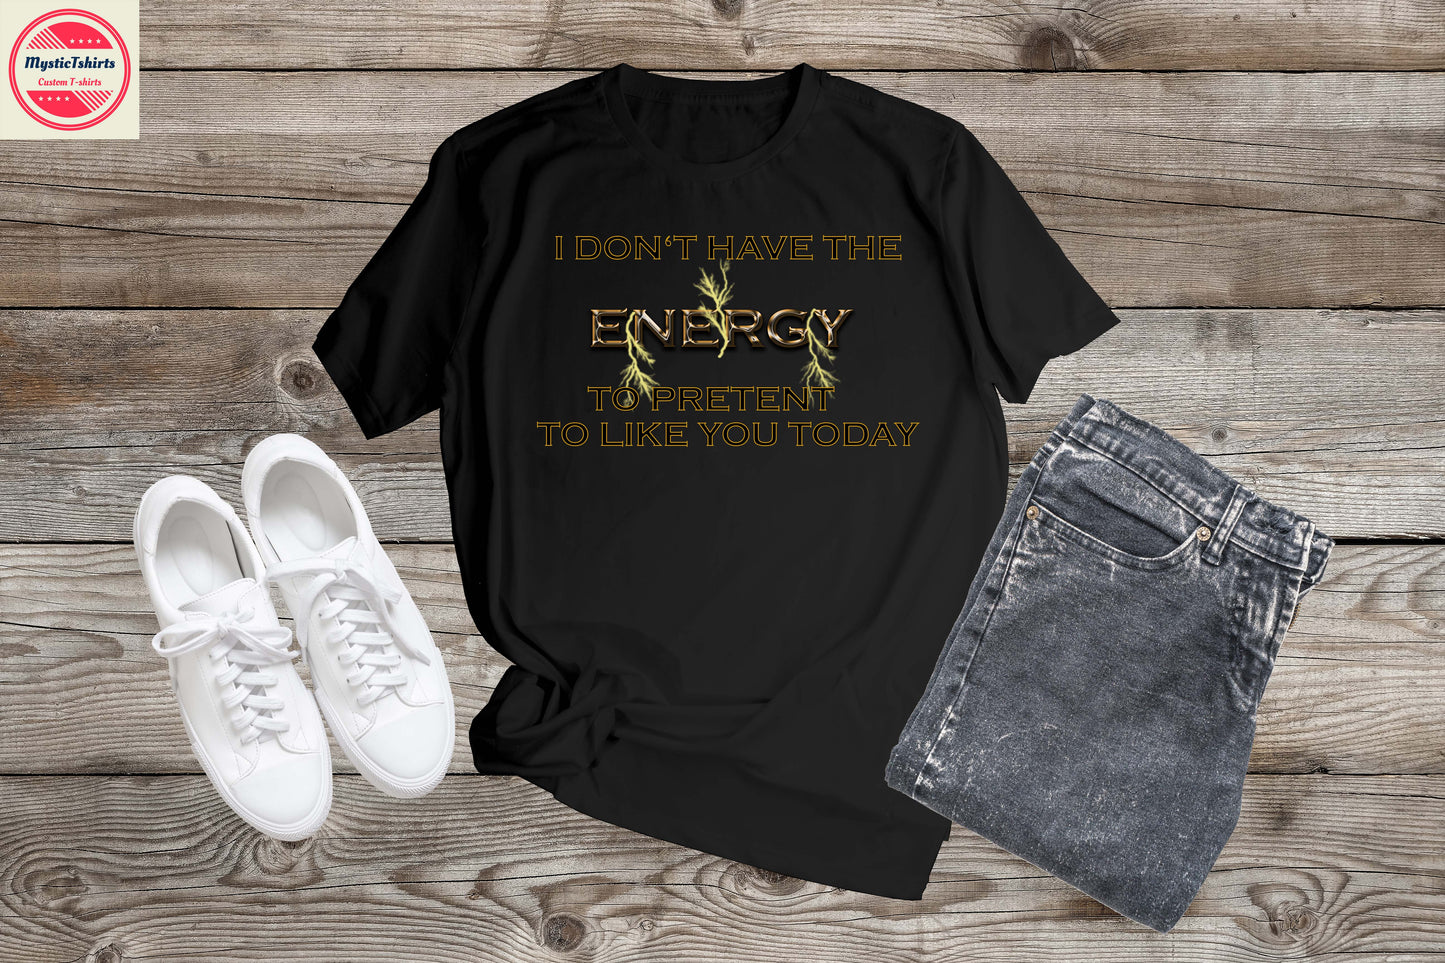 209. I DON'T HAVE THE ENERGY , Custom Made Shirt, Personalized T-Shirt, Custom Text, Make Your Own Shirt, Custom Tee